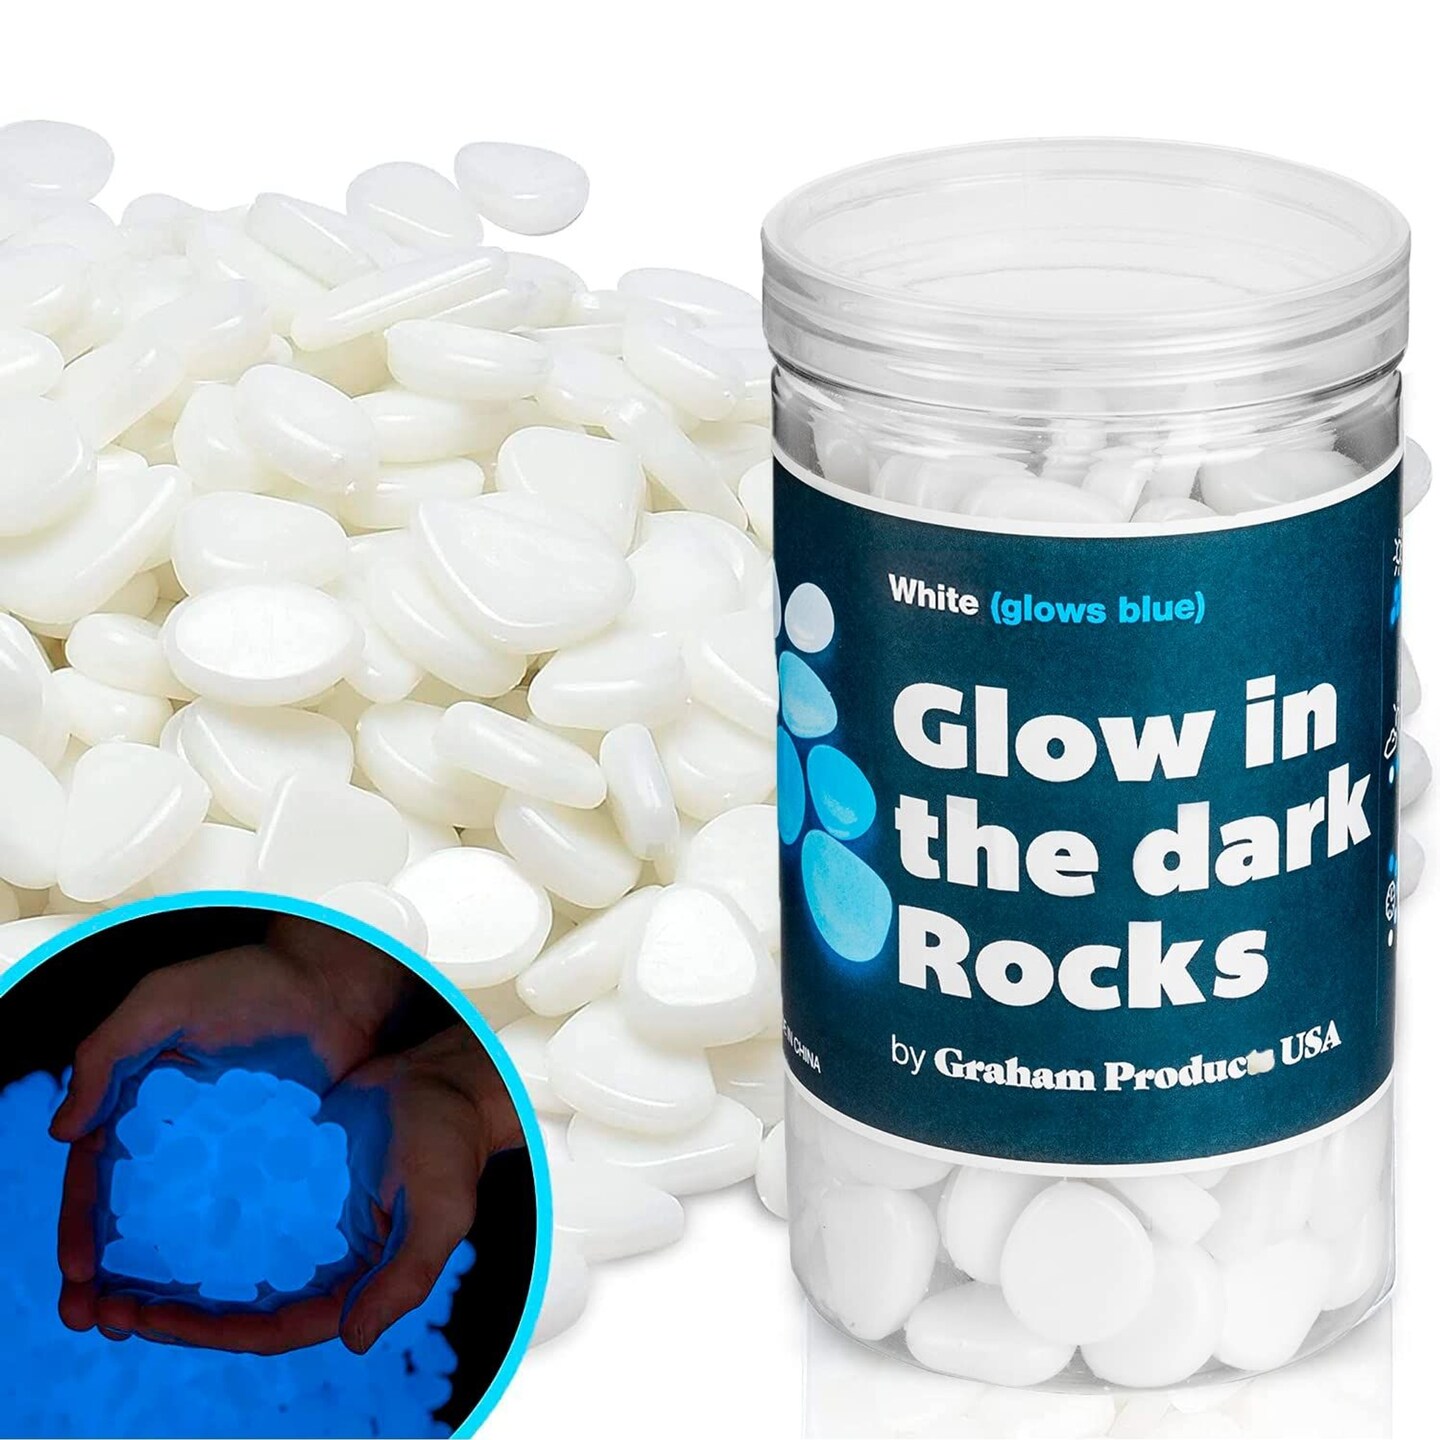 Graham Products 190 Pieces Glow in the Dark Rocks | Indoor &#x26; Outdoor Use - Garden, Fish Tank Pebbles, Planter, Walkway, Driveway Decoration &#x26; More | For Kids Aged 6 &#x26; Up | Powered by Sunlight - White